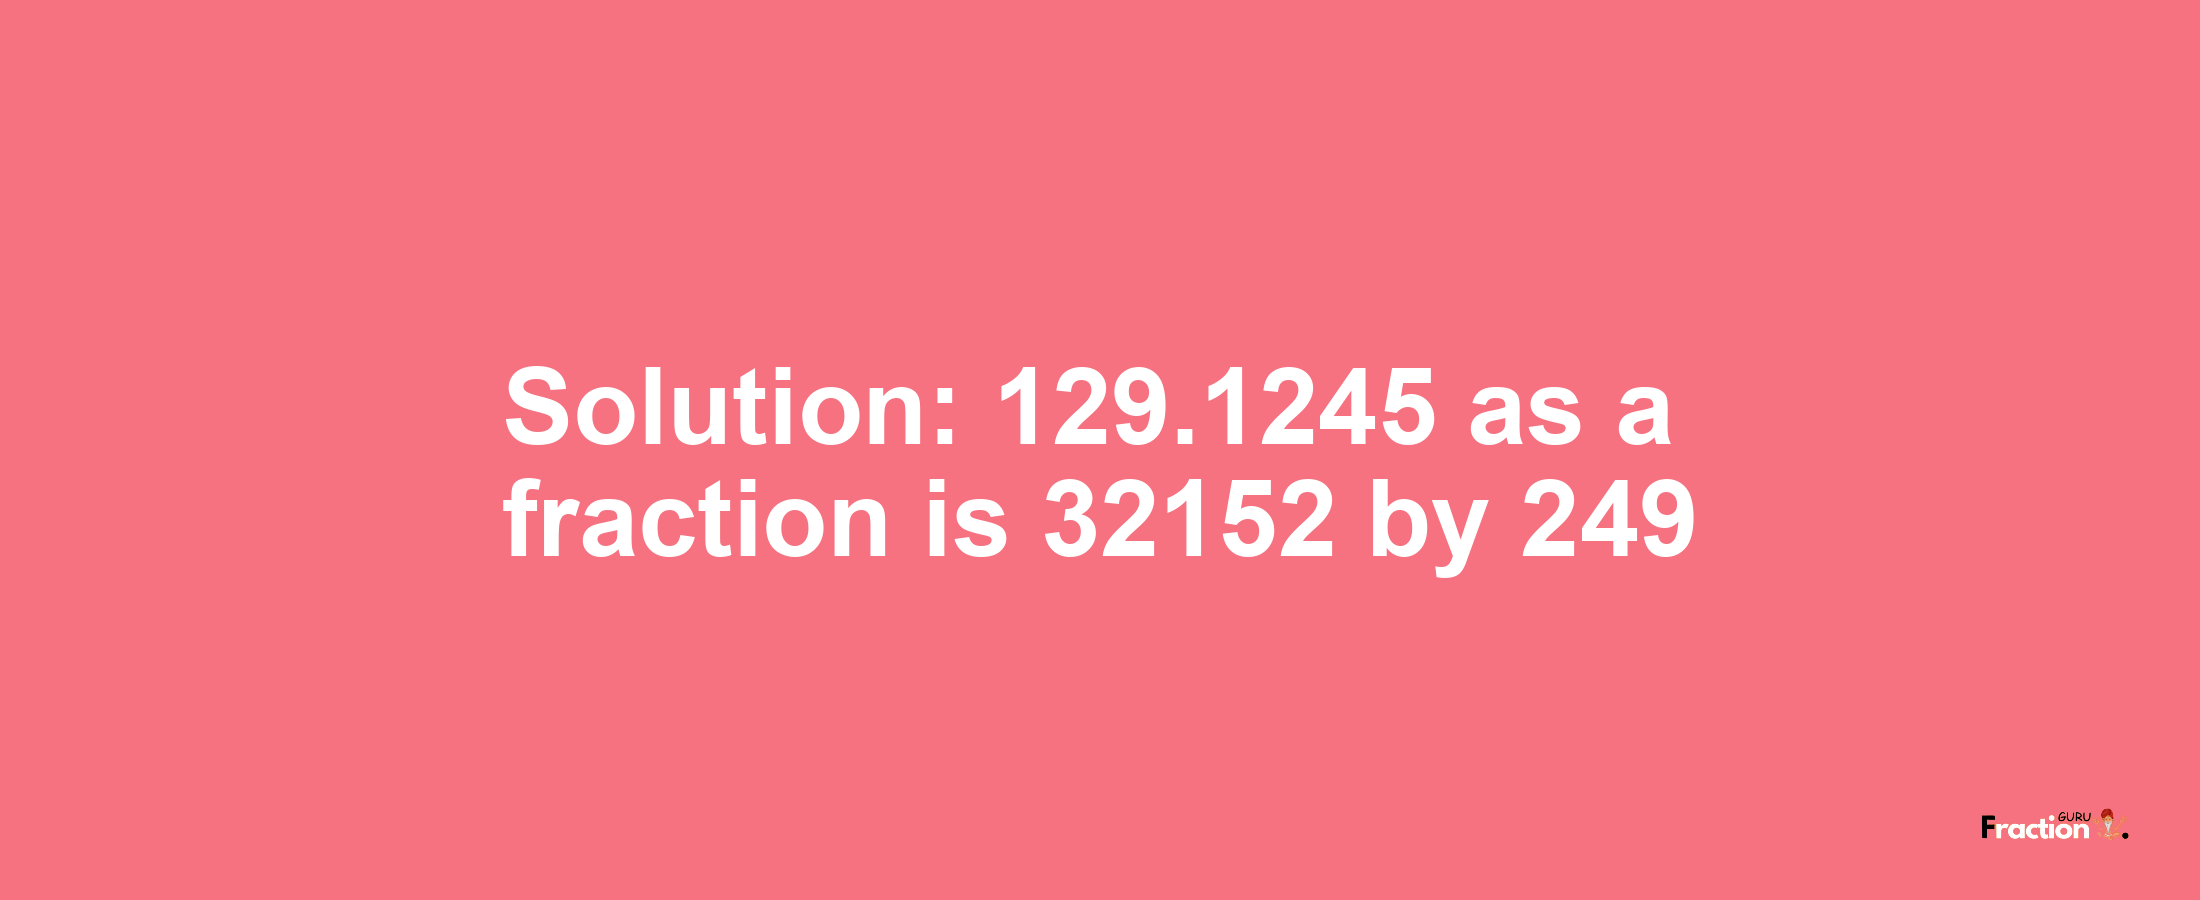 Solution:129.1245 as a fraction is 32152/249